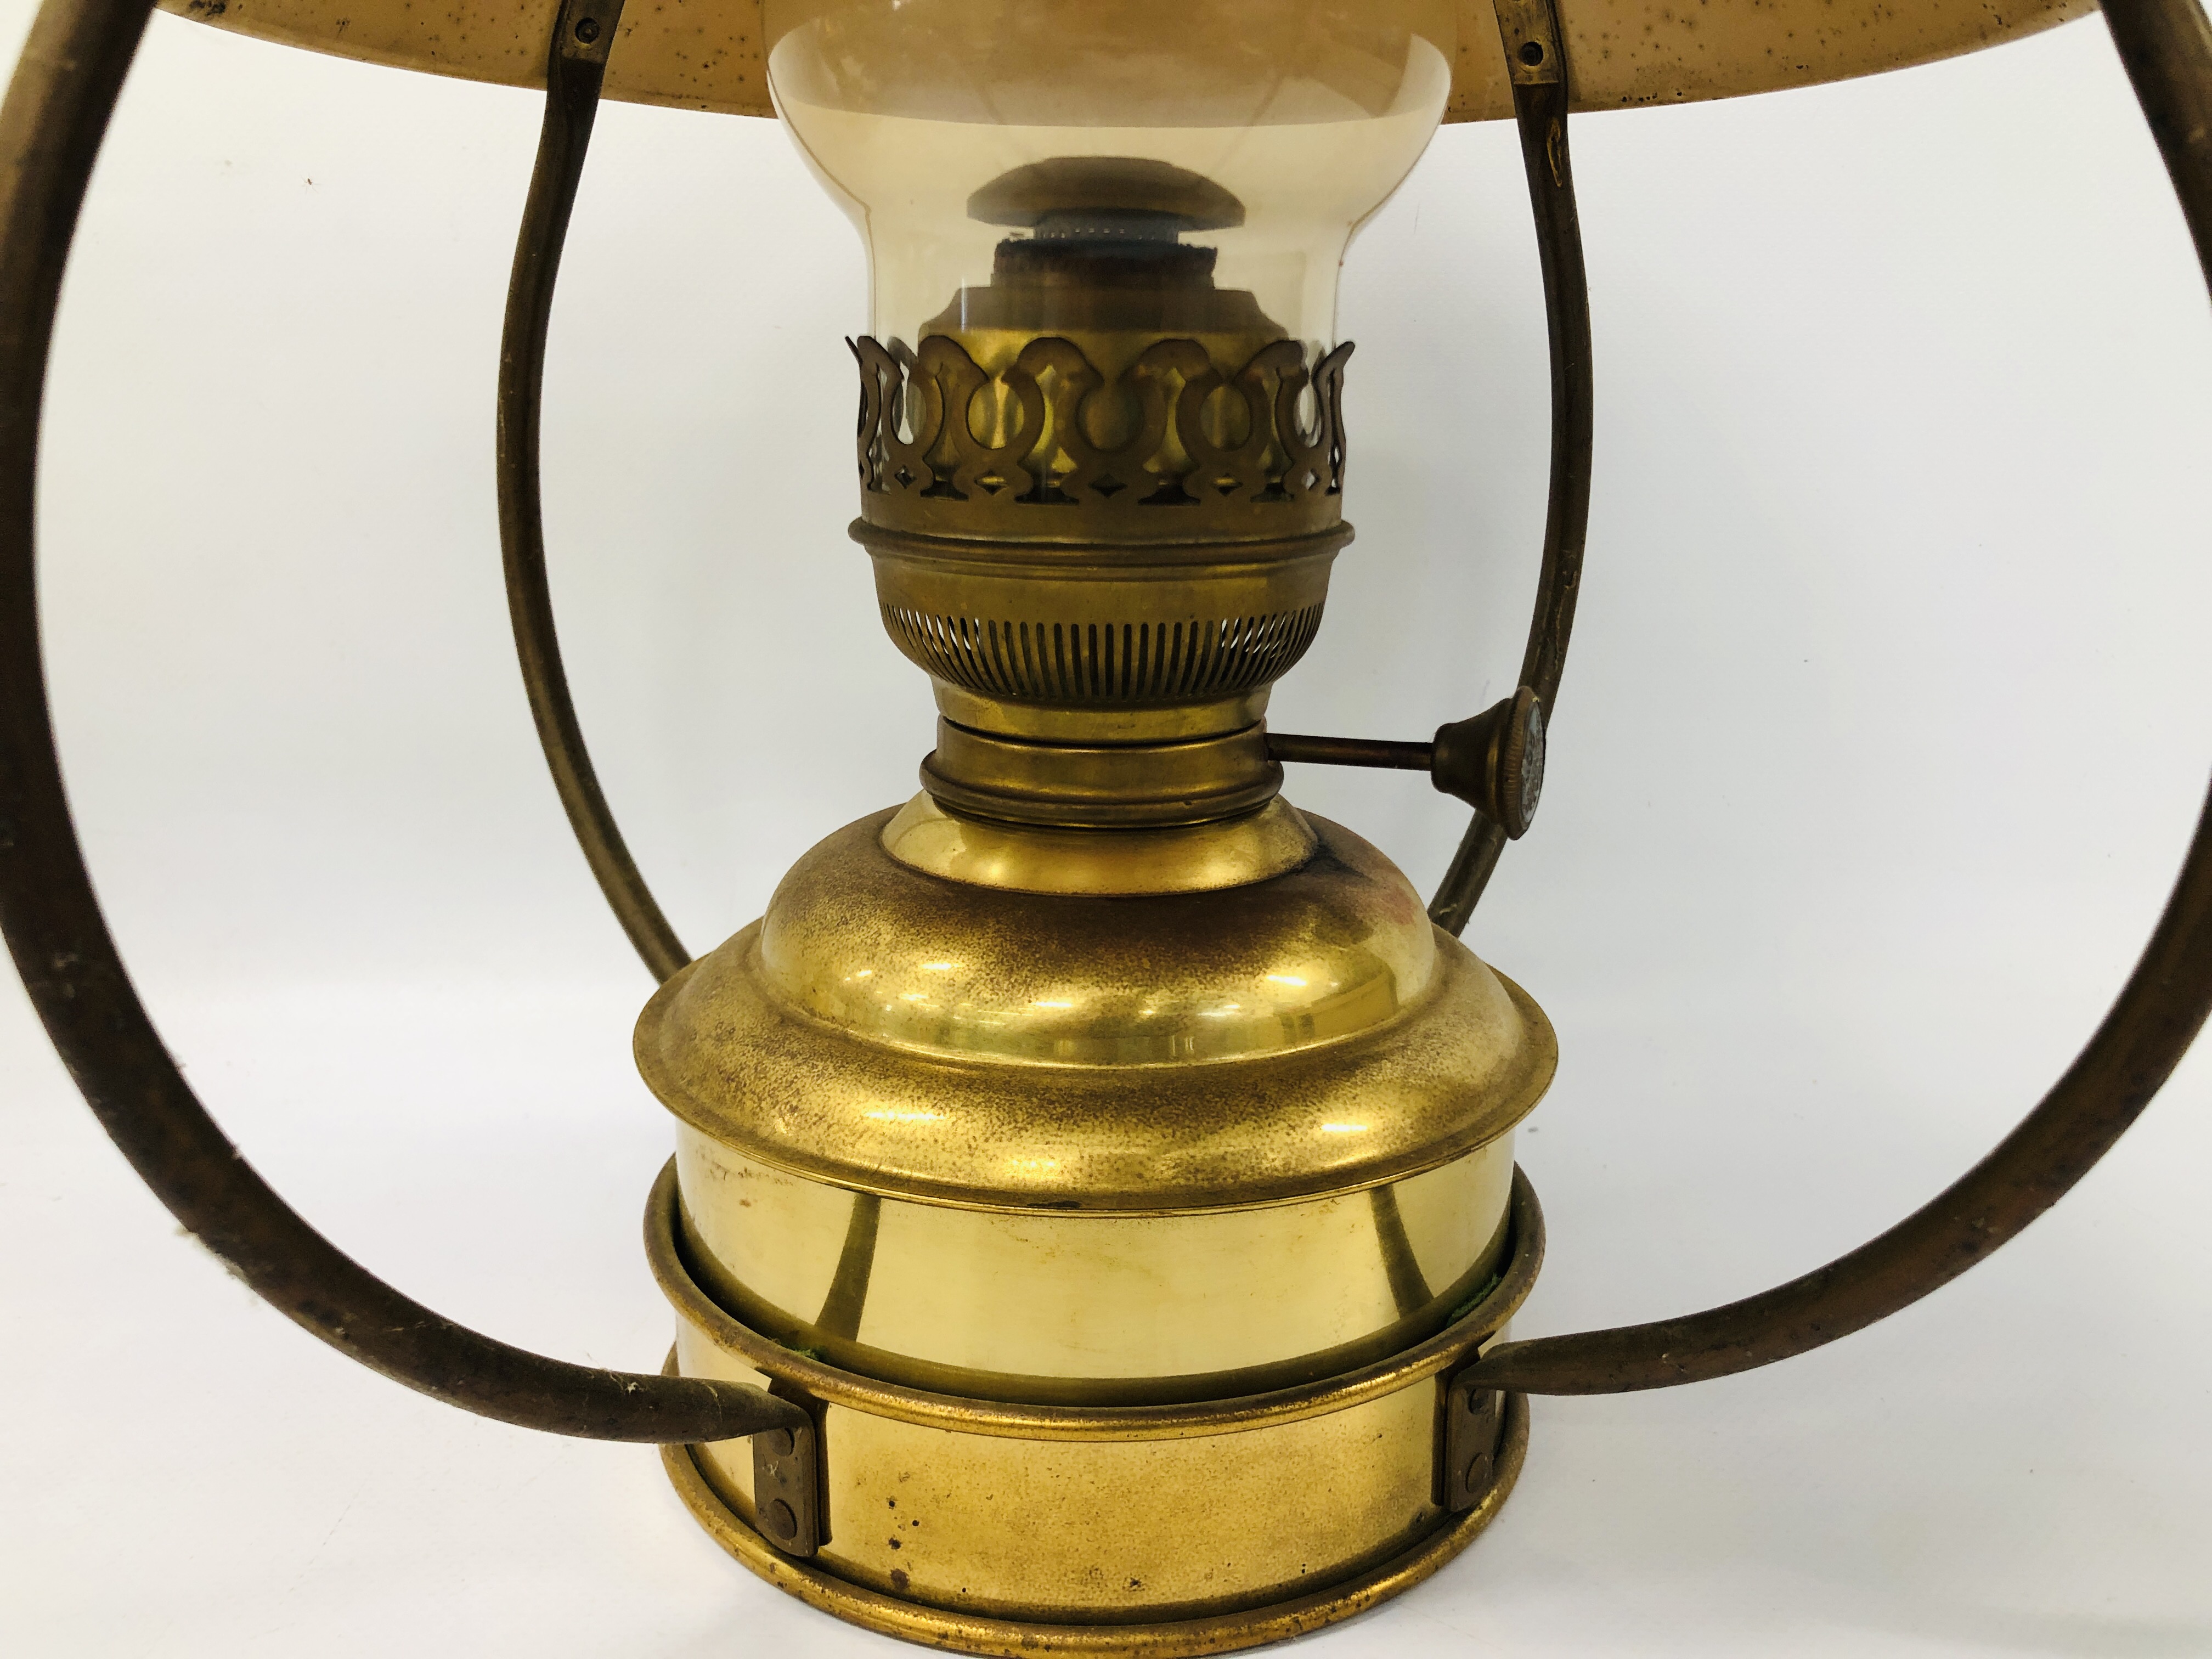 MIXED BRASS AND COPPER TO INCLUDE OIL LAMPS, LAMPS, STOVE, TRIVET, WATERING CAN, SCALES, CUPS, - Image 12 of 27